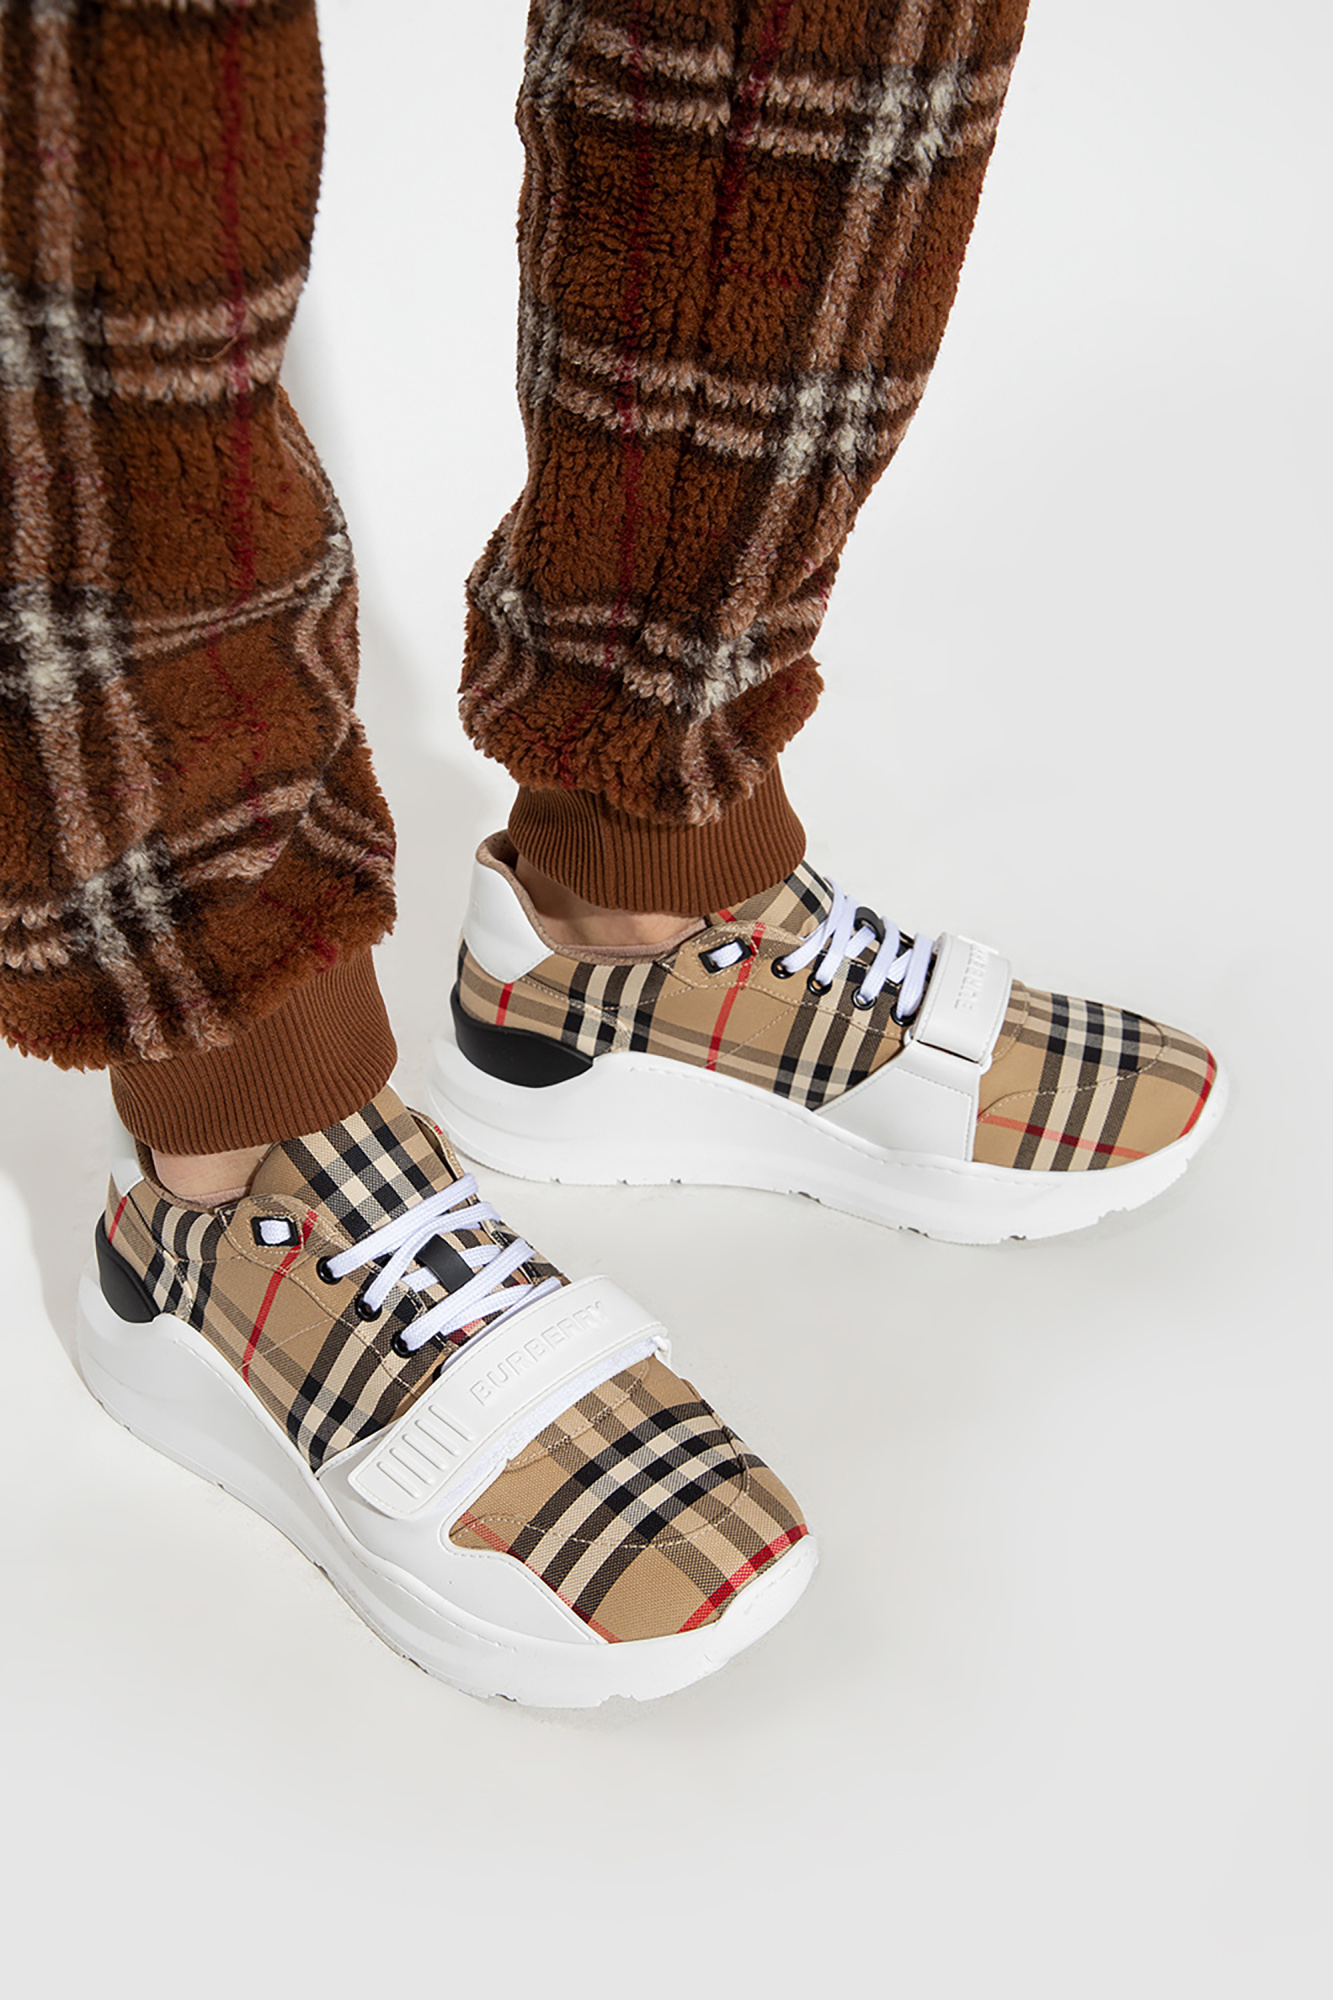 Sports shoes with a plaid pattern Burberry - IetpShops Timor - Leste -  Sneakers and shoes Nike Air Force 1 Pixel